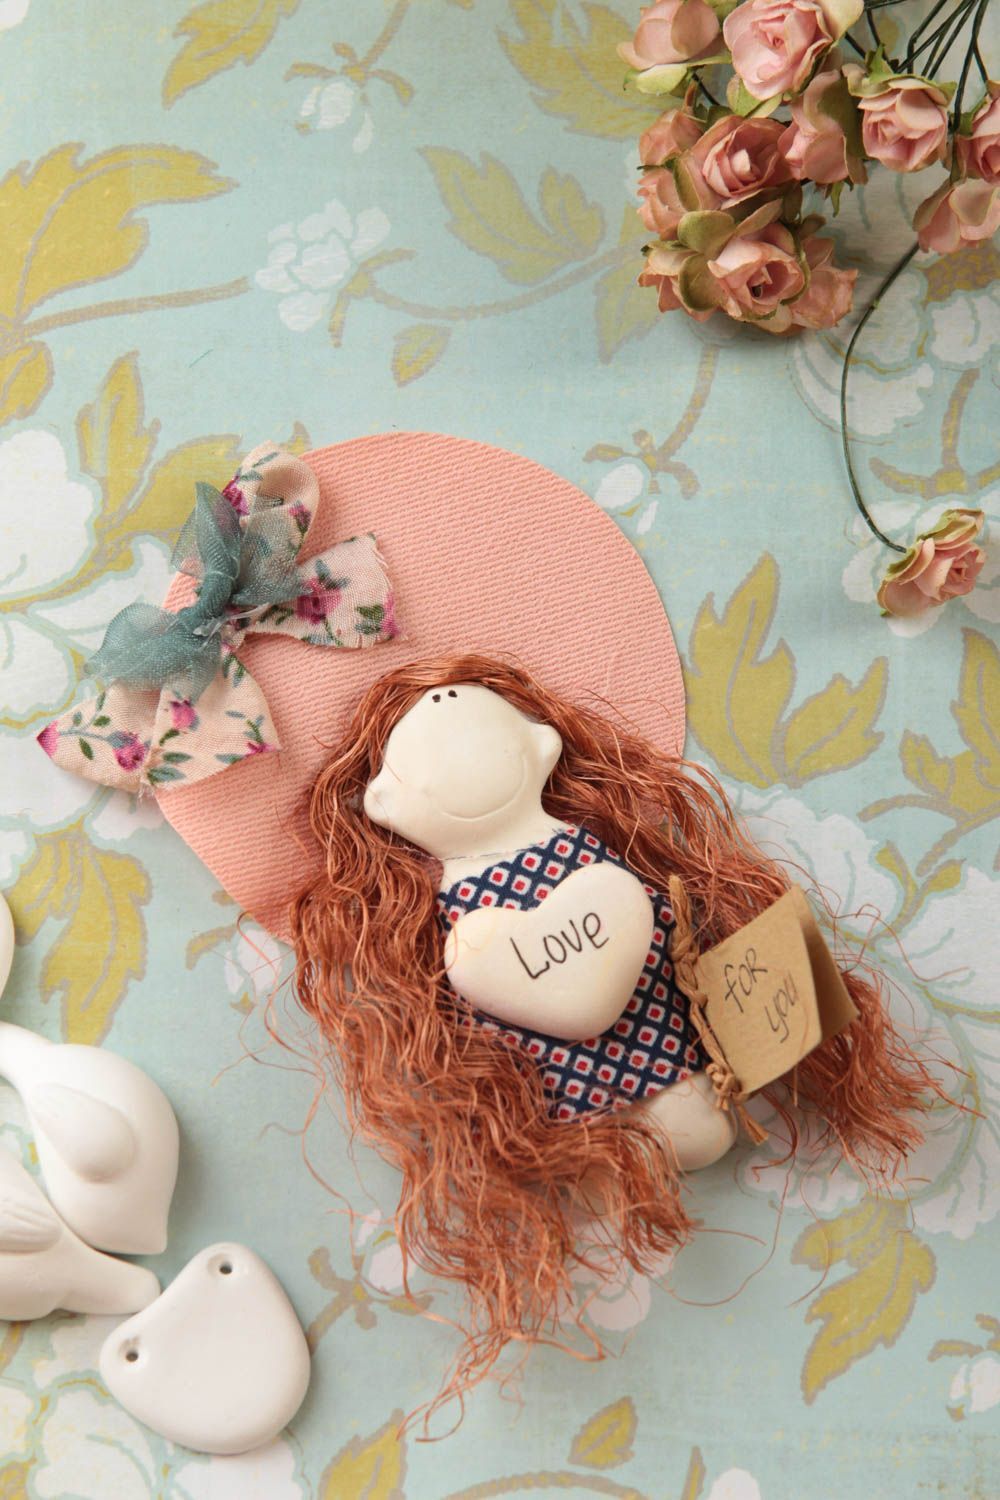 Beautiful handmade textile toy rag doll home decoration decorative use only photo 1